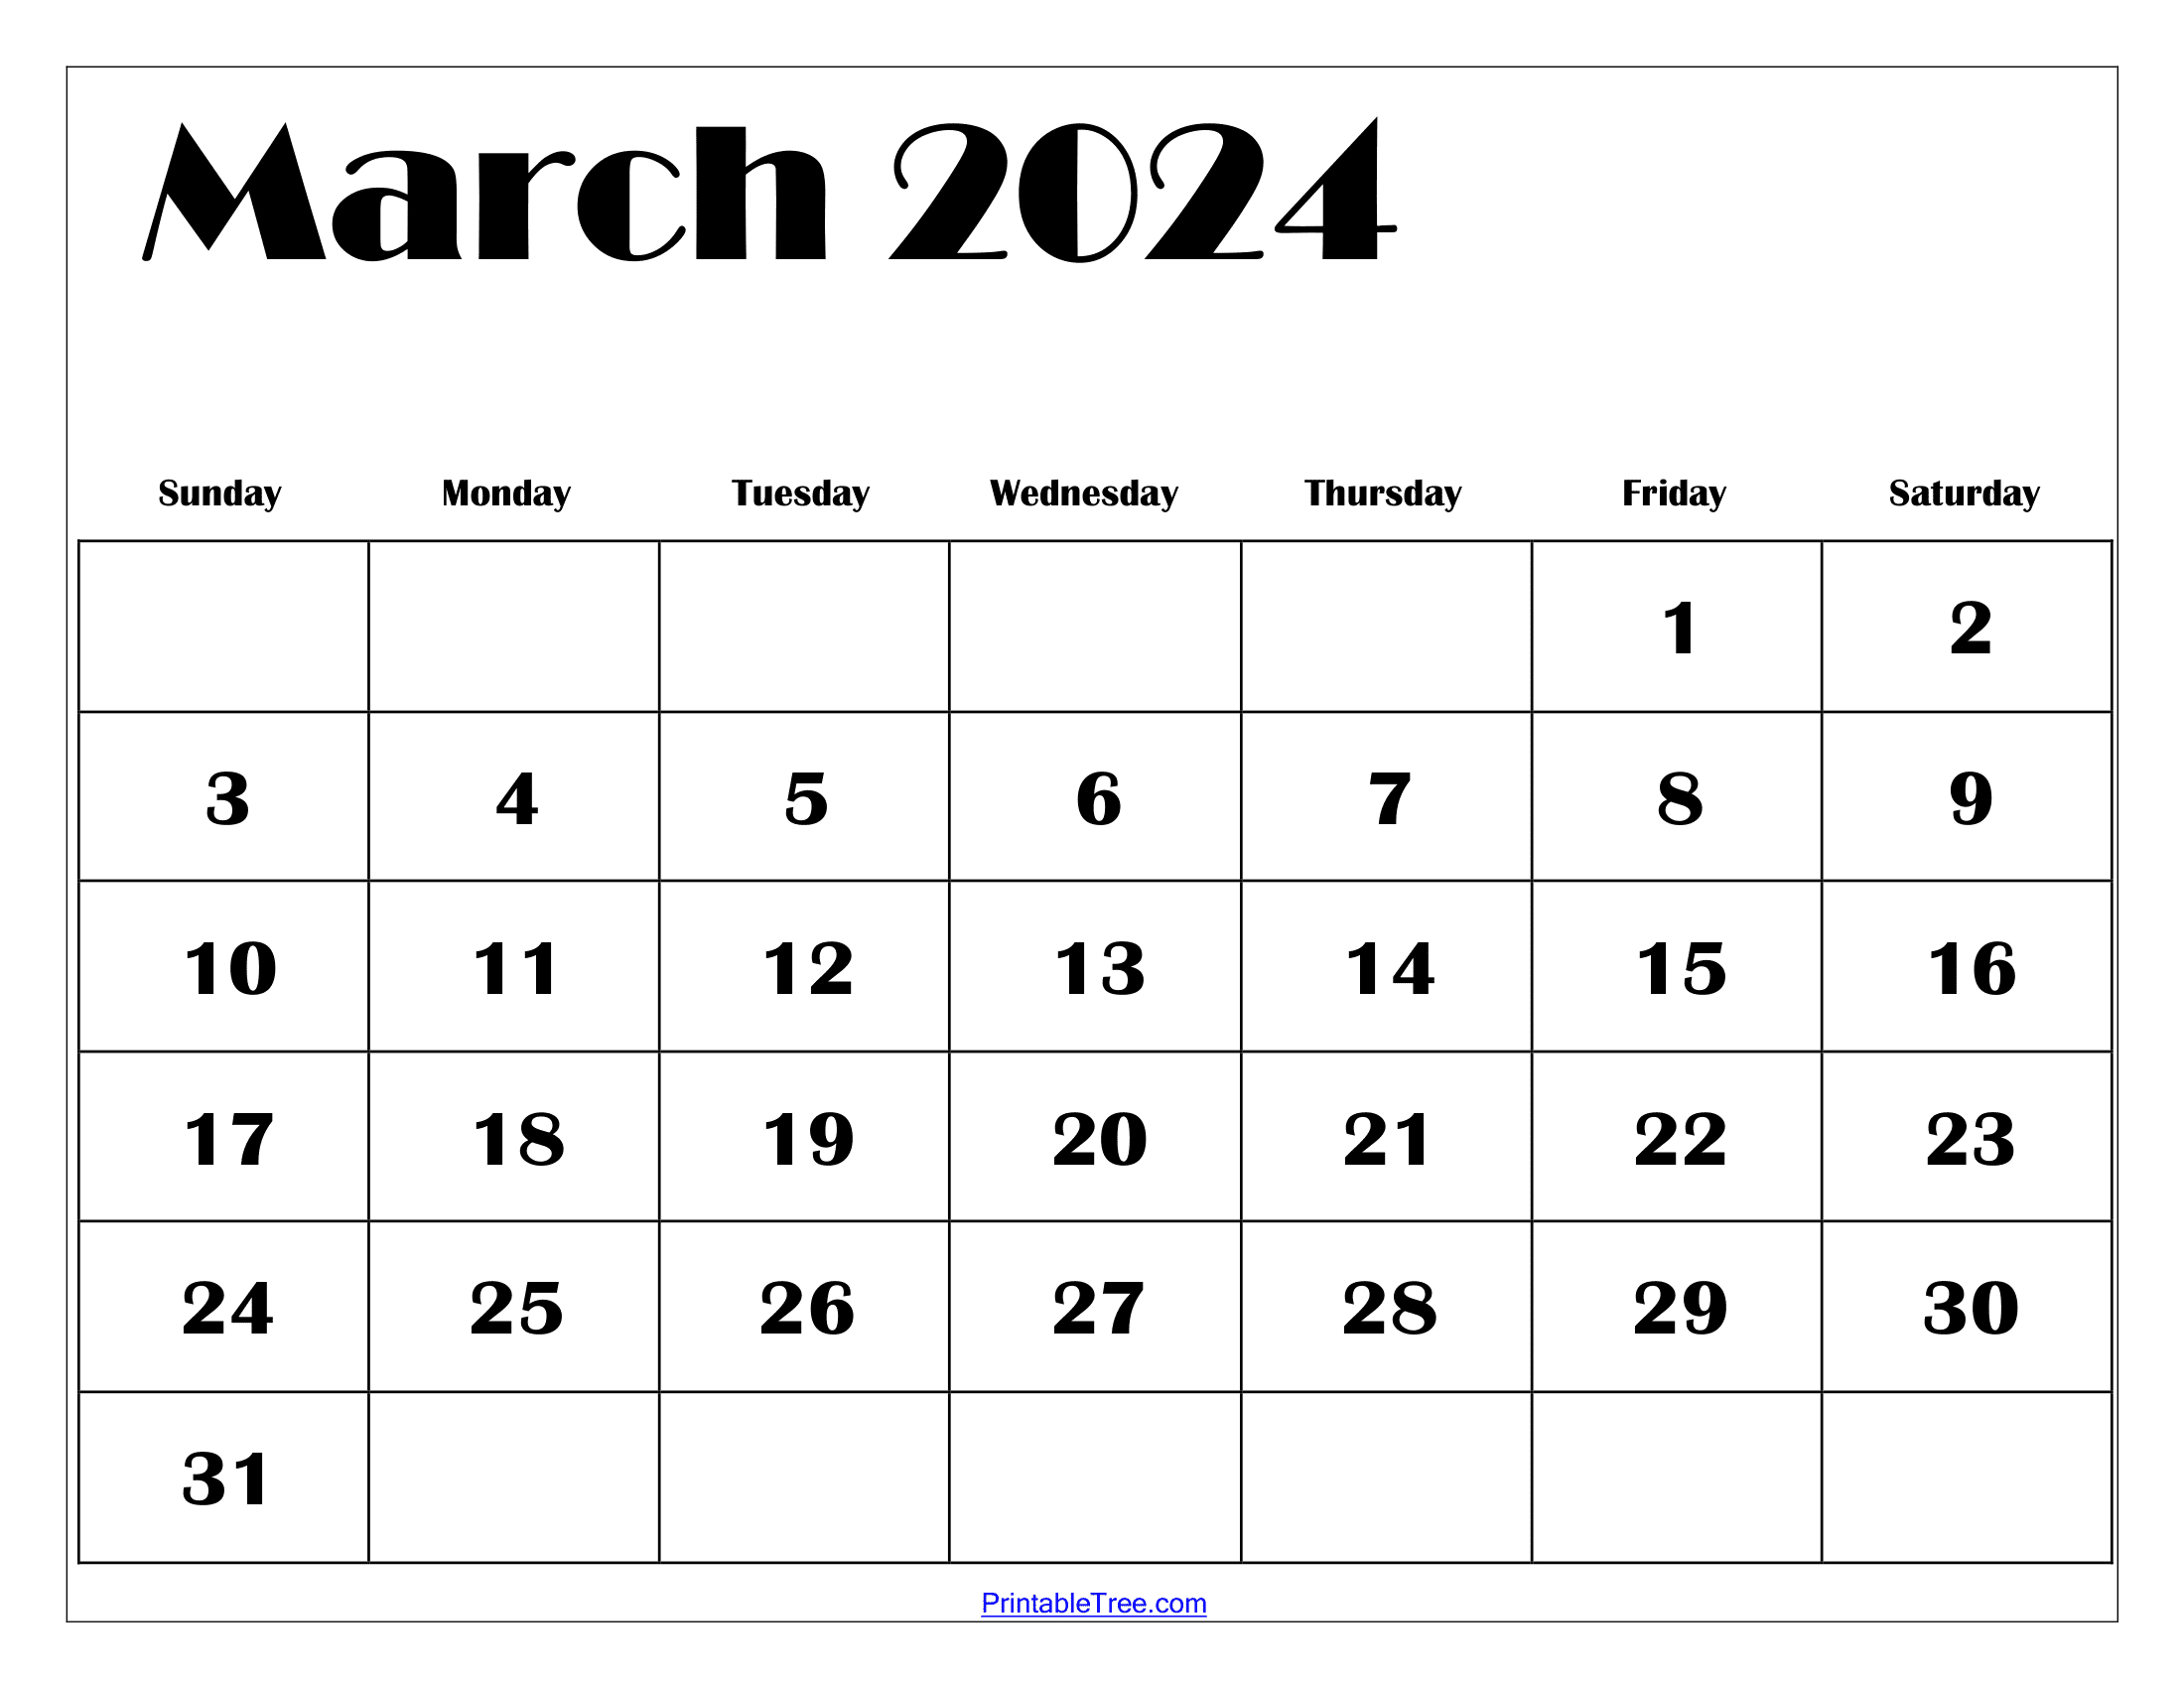 March 2024 Calendar Printable Pdf With Holidays Template Free | March 2024 Calendar Printable